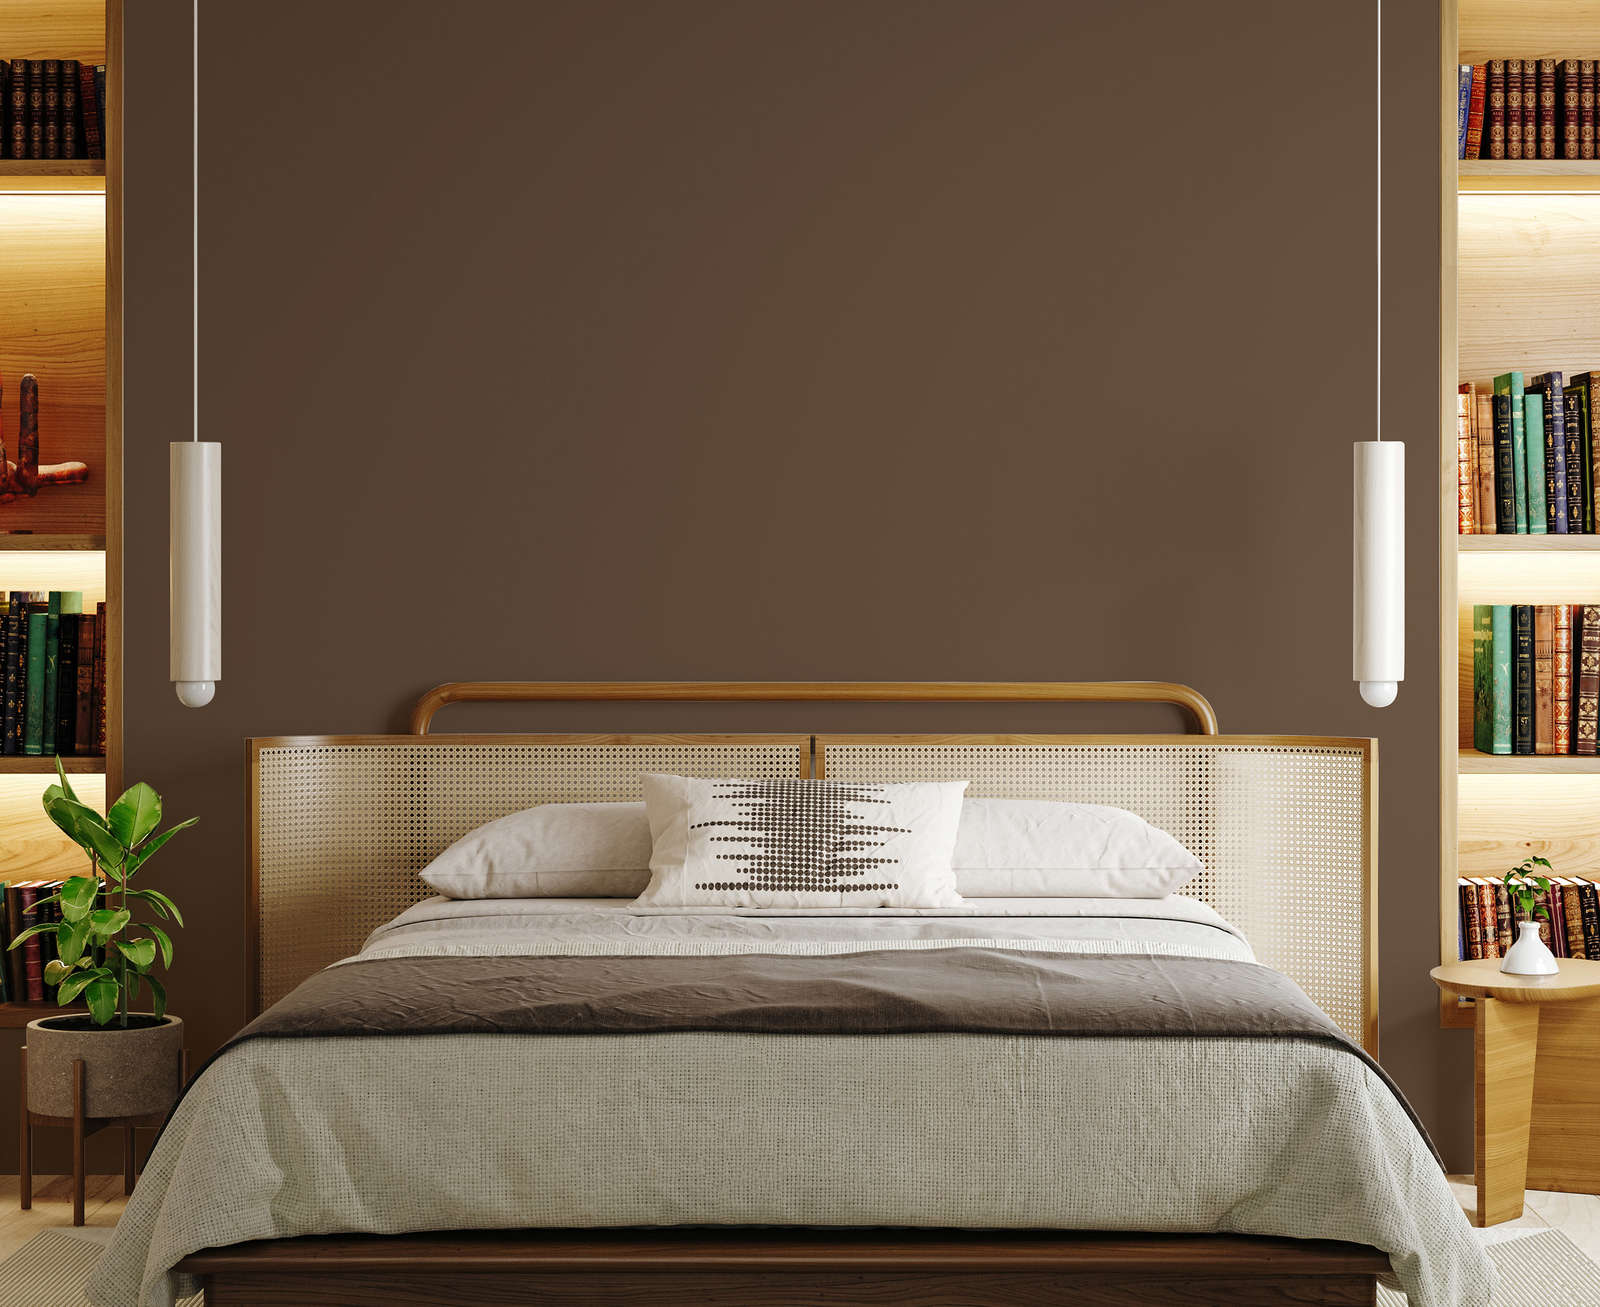             Premium Wall Paint Nature Nut Brown »Modern Mud« NW720 – 2.5 litre
        